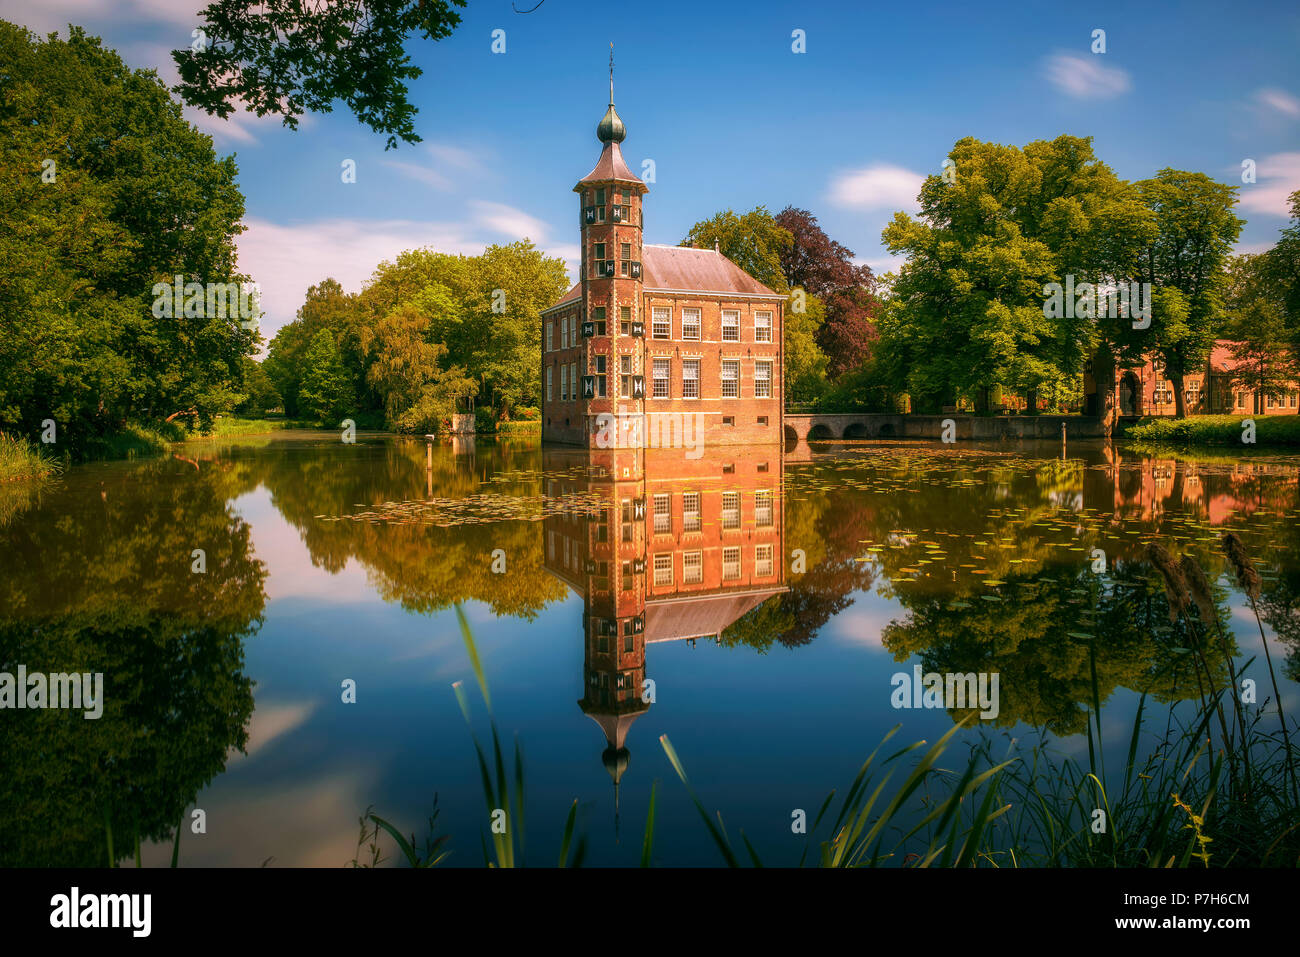 Castle Bouvigne and the surrounding park with reflection in water situated near the Dutch city of Breda in Netherlands. Long exposure. Stock Photo